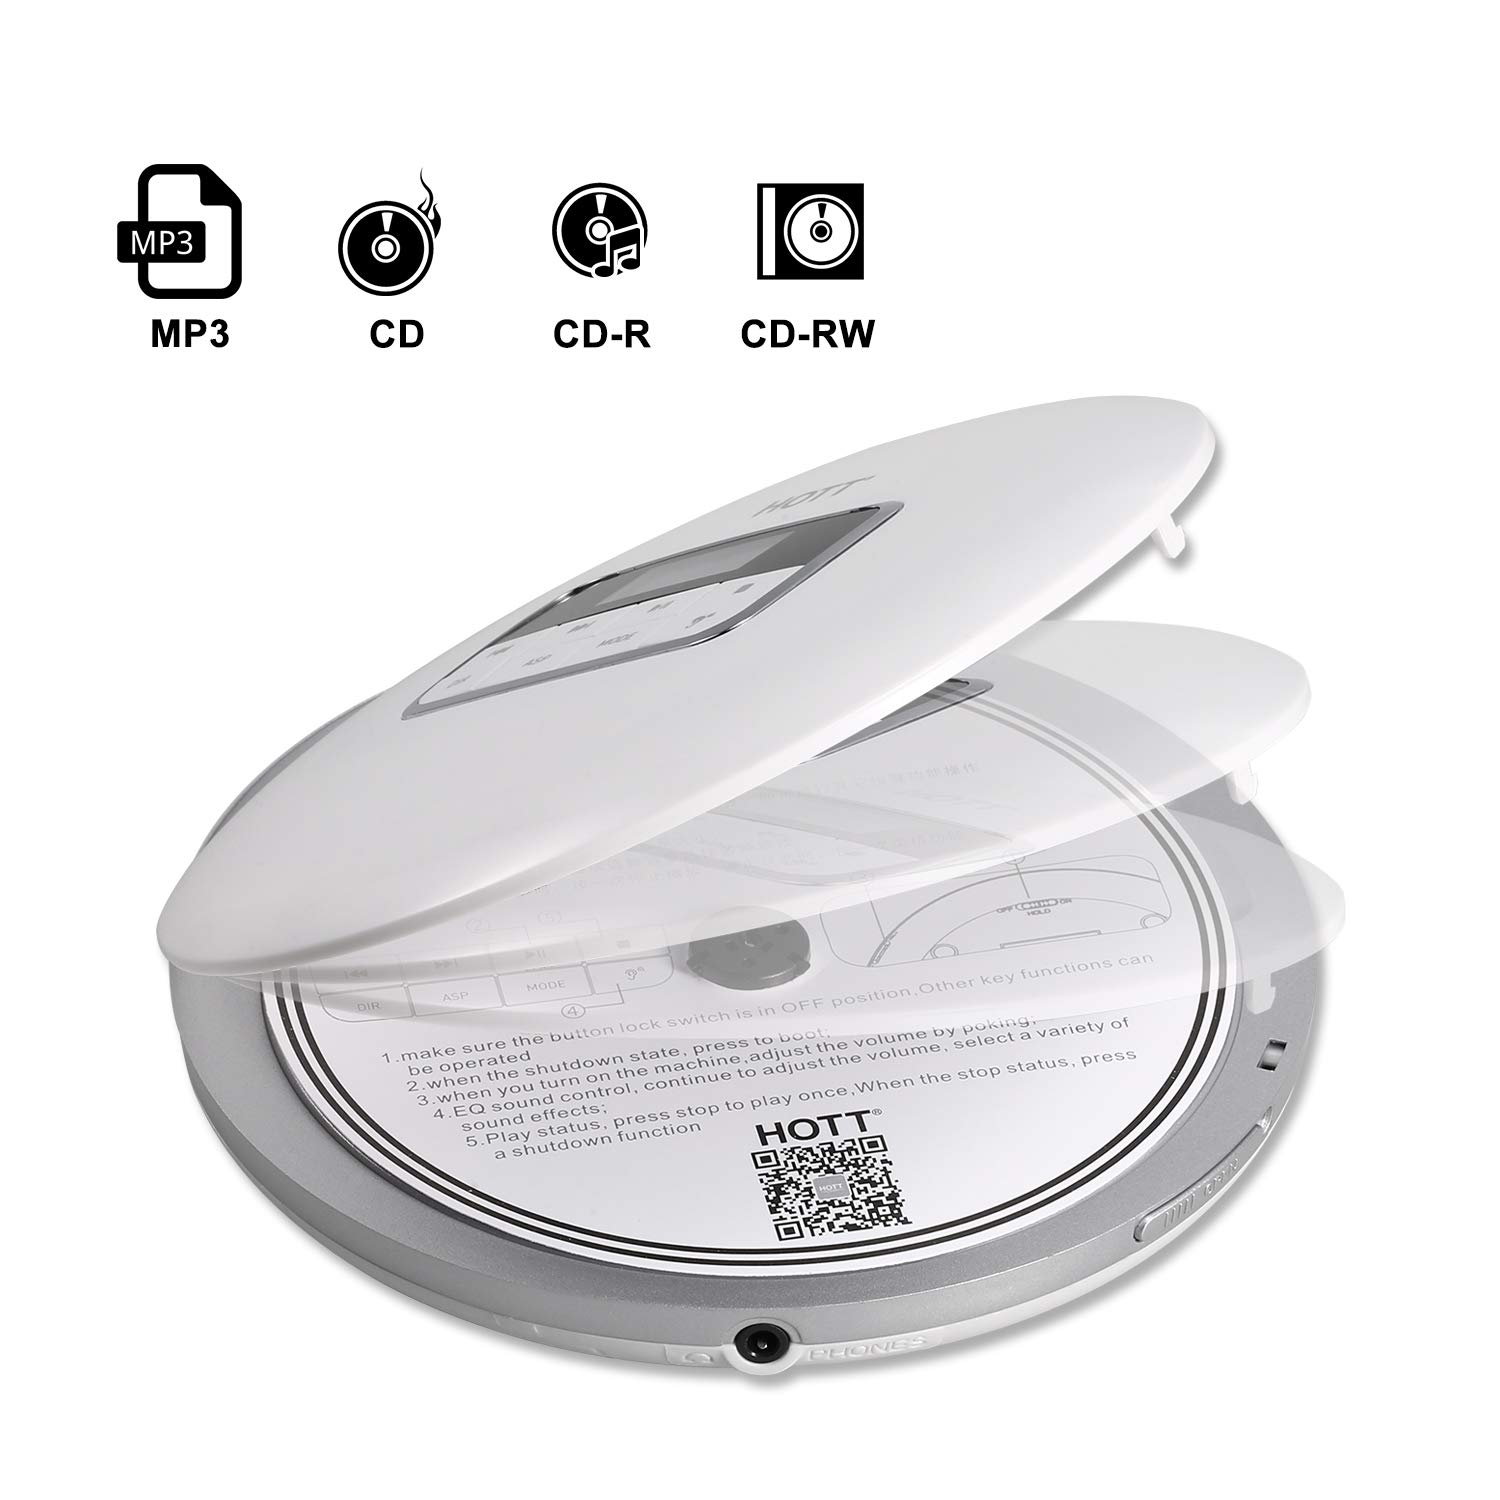 HOTT Portable CD Player Personal Compact Discman CD Player Small Walkman MP3 Disc Music CD Player (White) - image 3 of 7